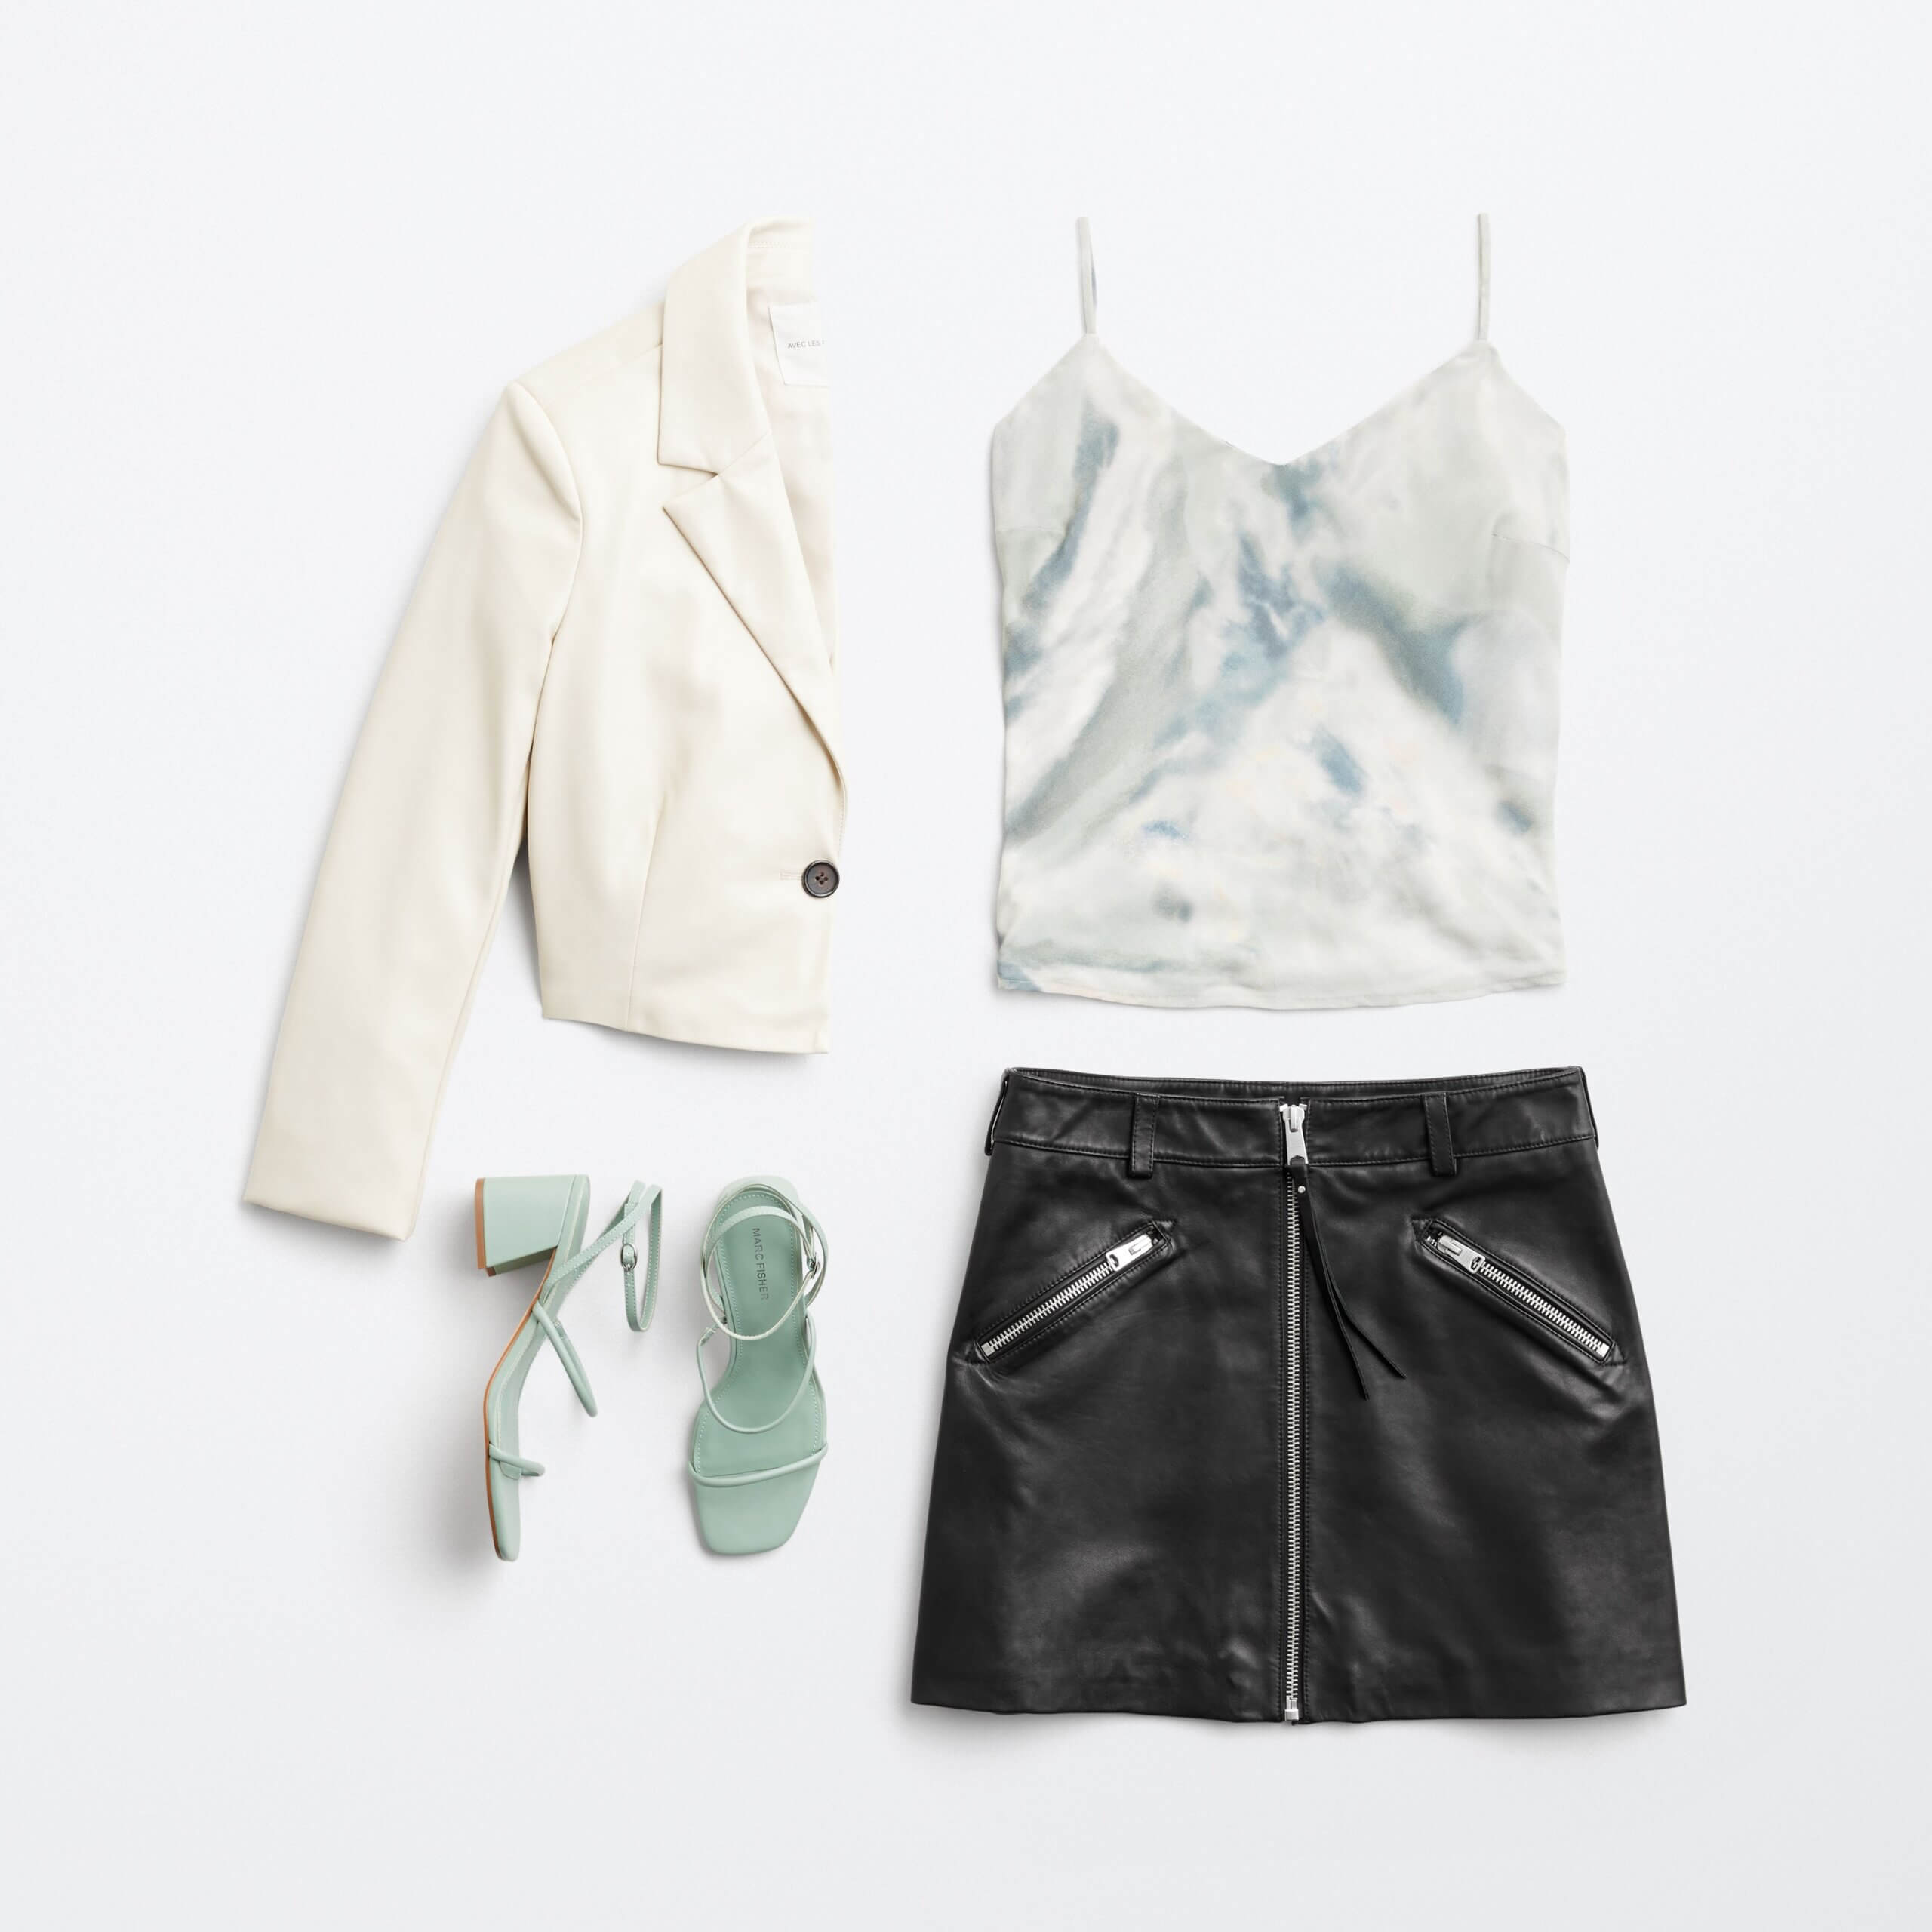 Stitch Fix women's outfit laydown featuring black suede skirt, white camisole tank, white cropped jacket and heeled sandals. 